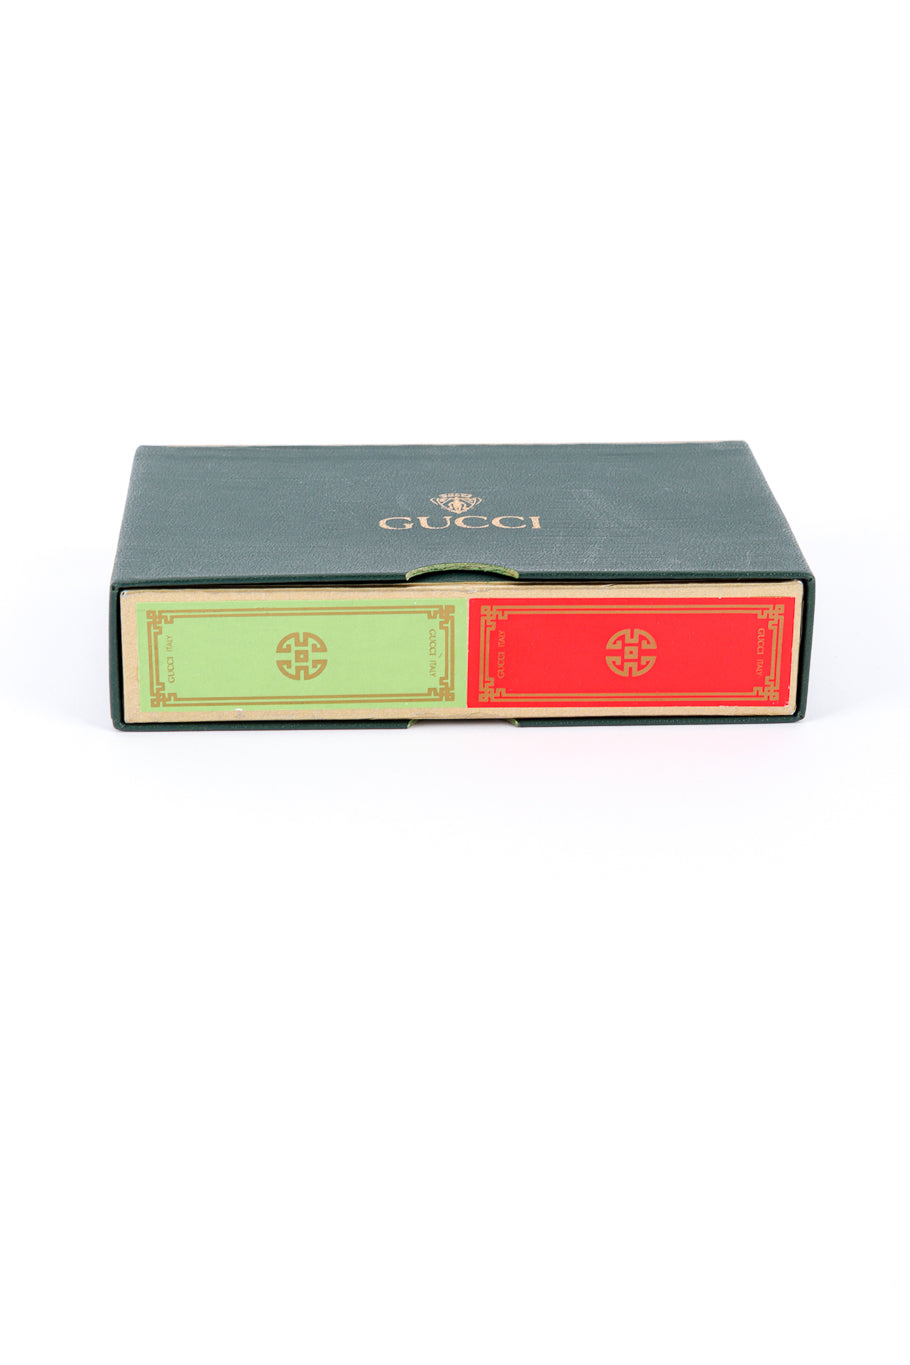 Vintage Gucci Red & Green 2 Deck Playing Card Set II cards in box @recessla